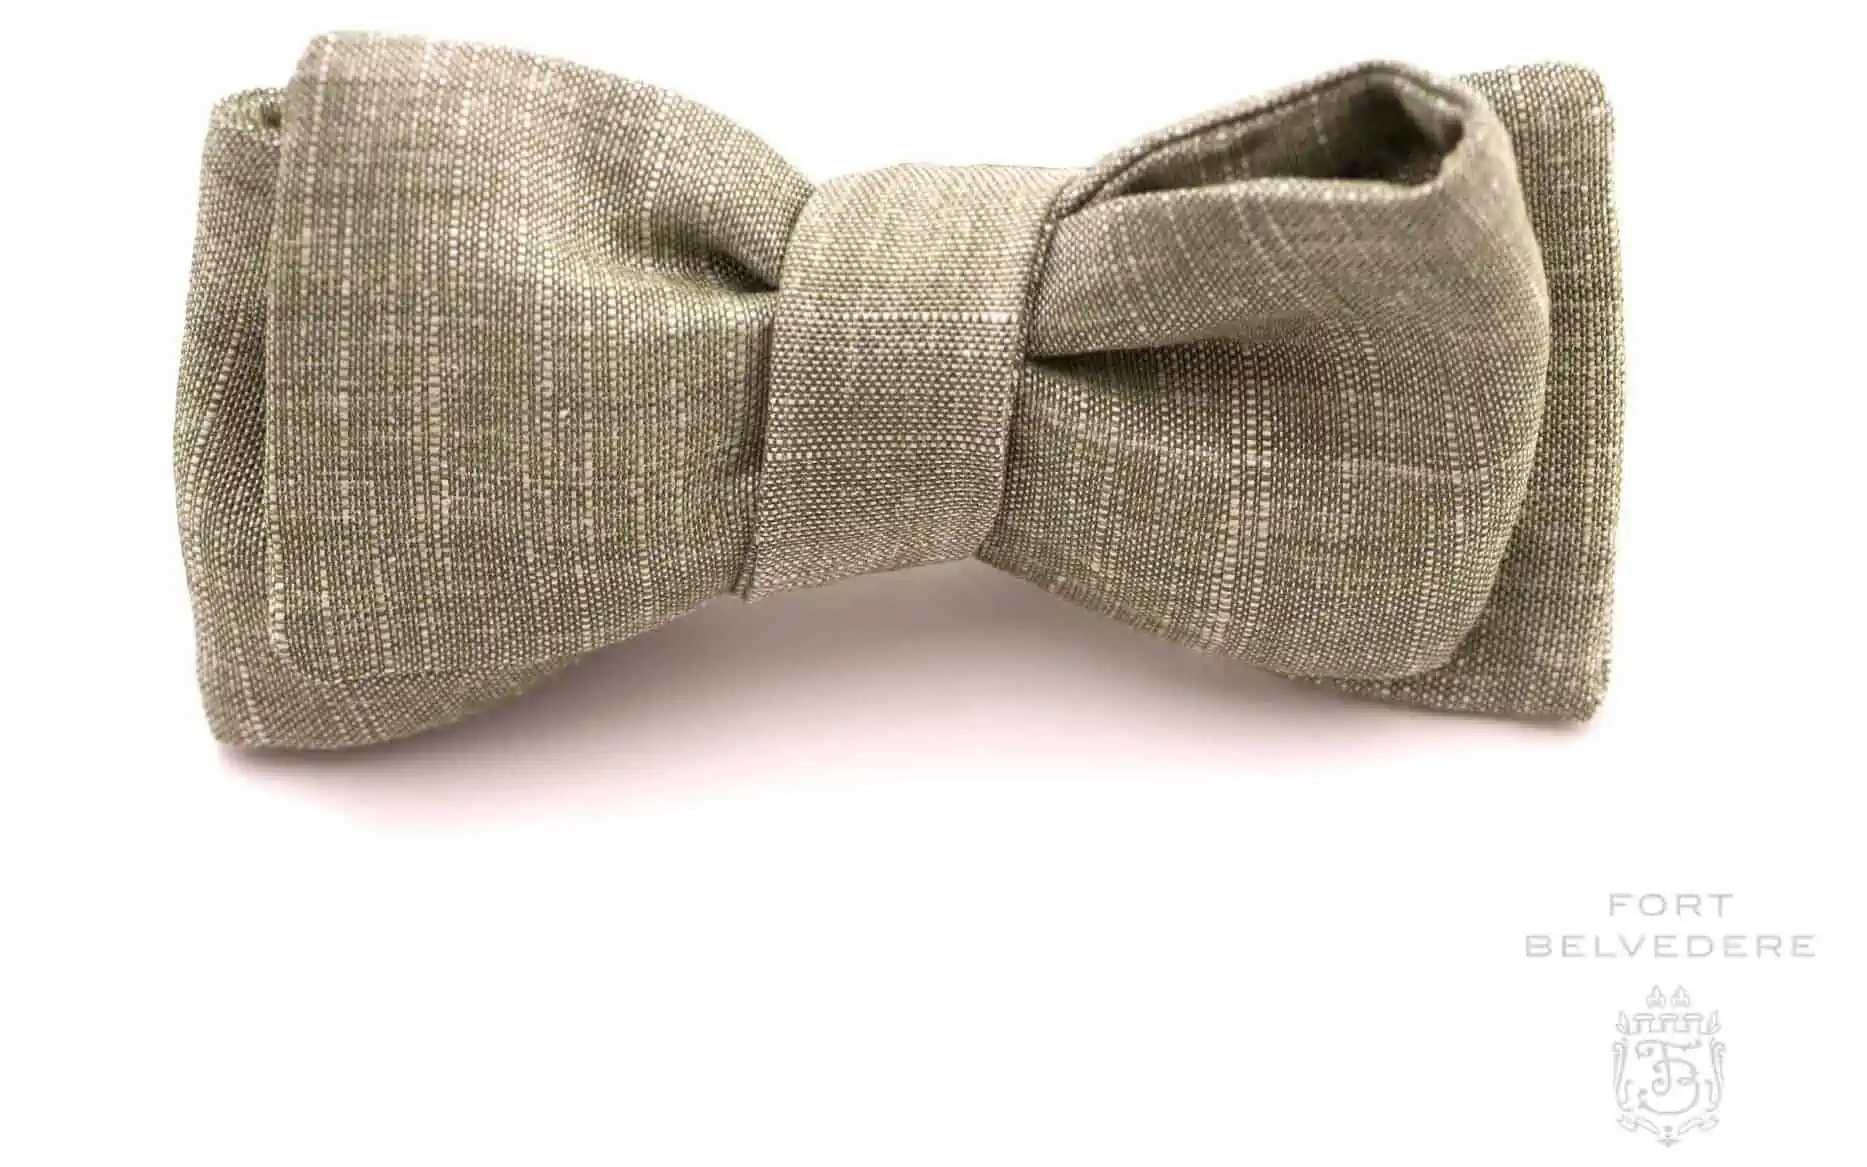 Asymmetrical Bow Tie in Solid Olive Green Textured Wool Linen Blend